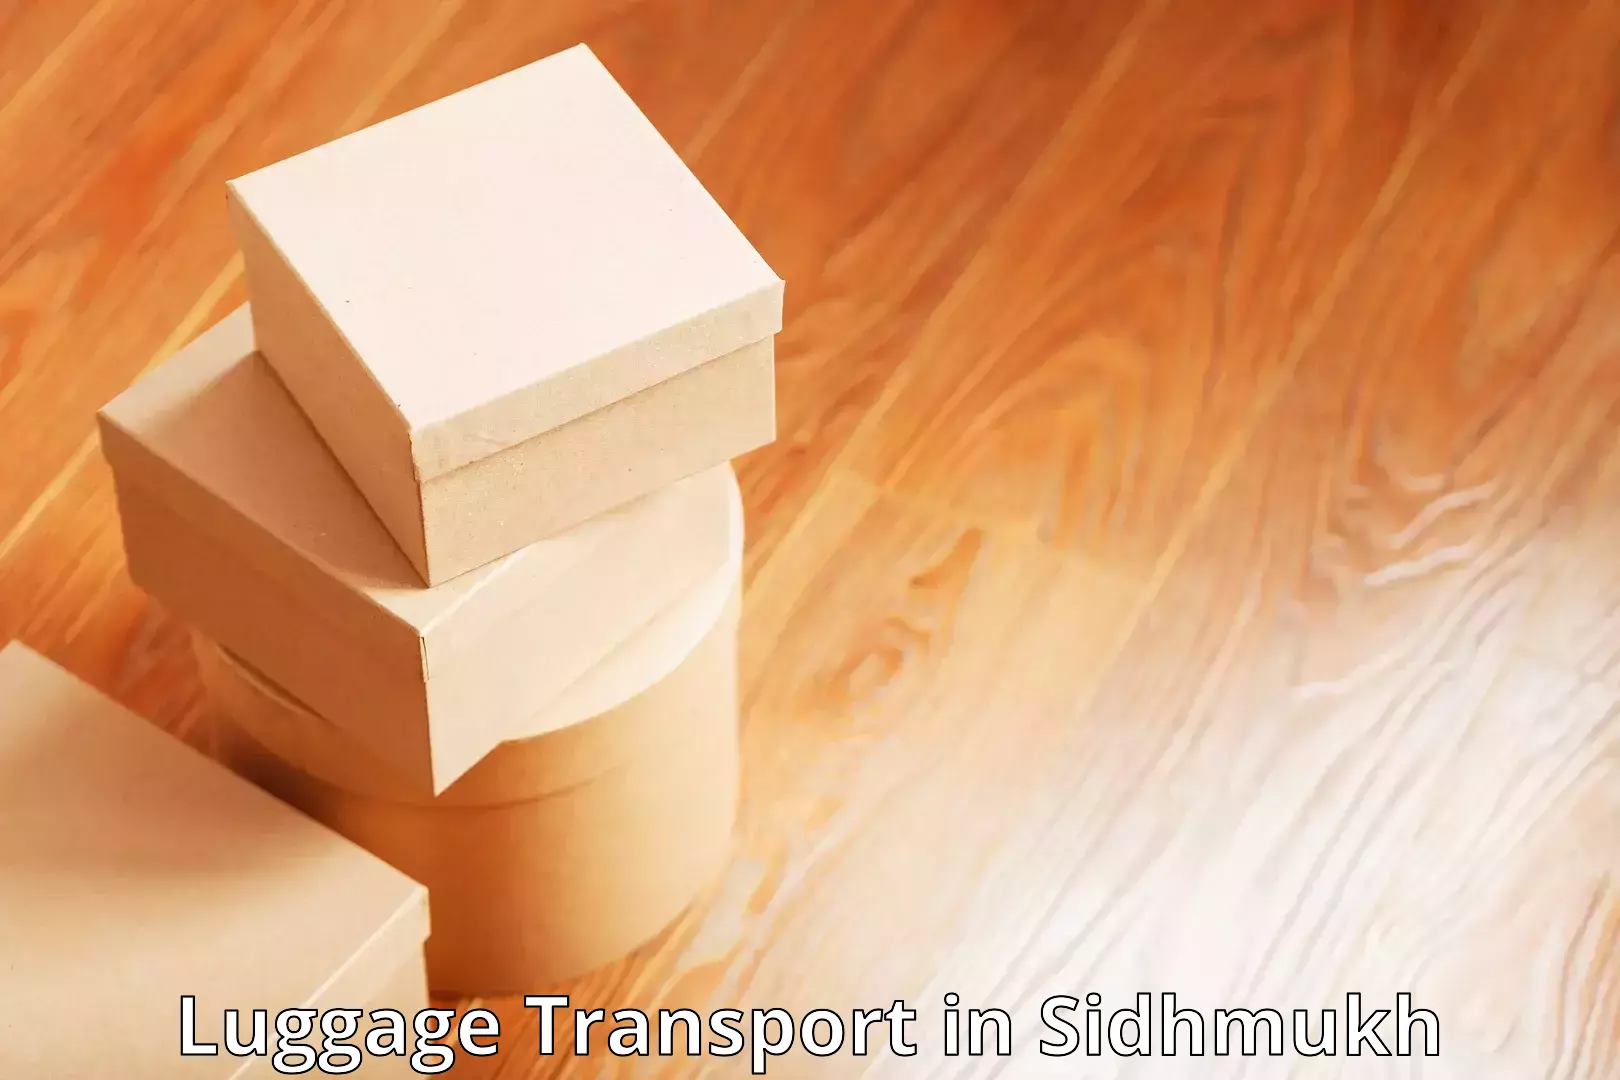 Hassle-free luggage shipping in Sidhmukh